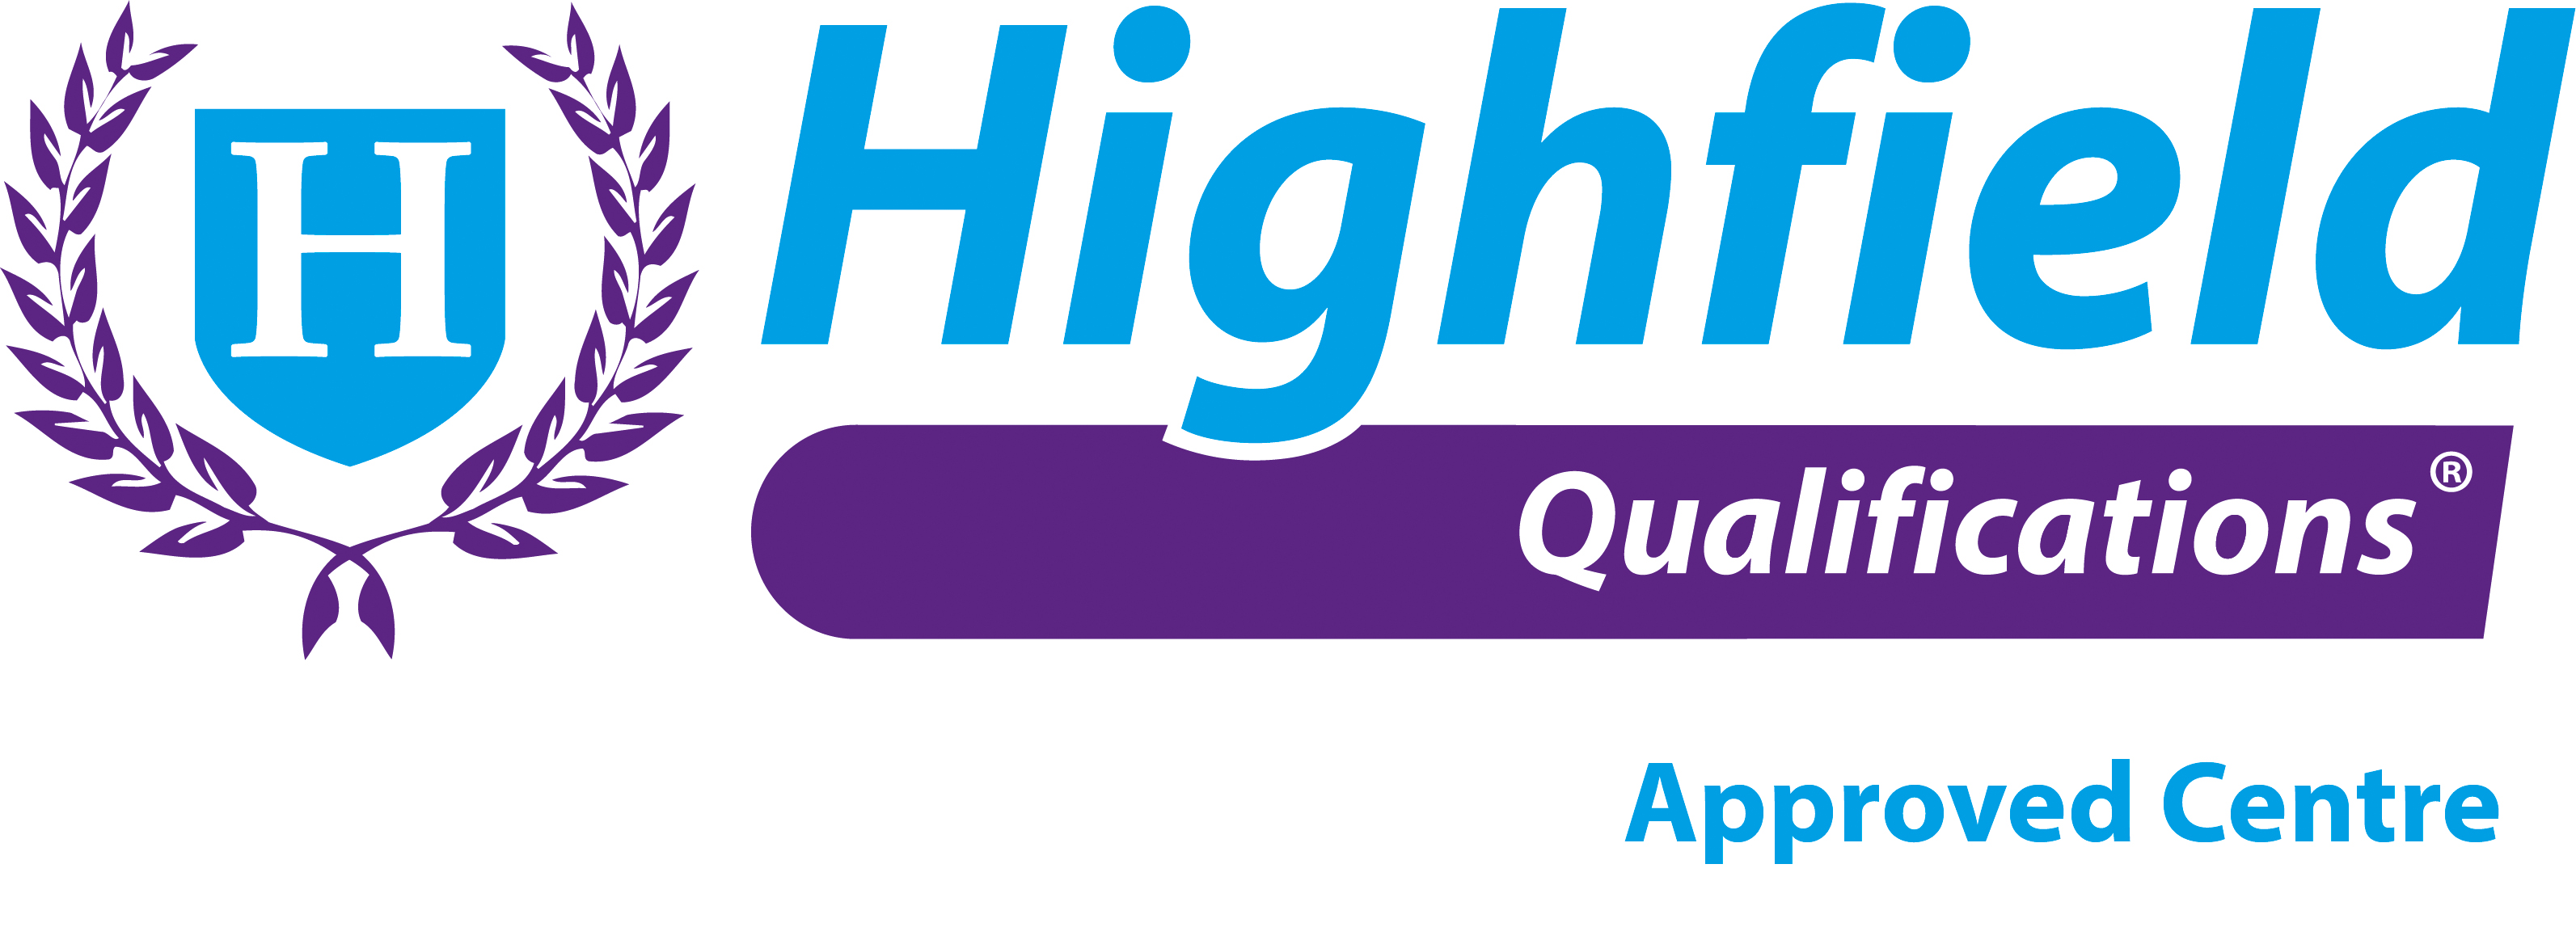 Highfield_Qualifications_-_approved_centre (1).png